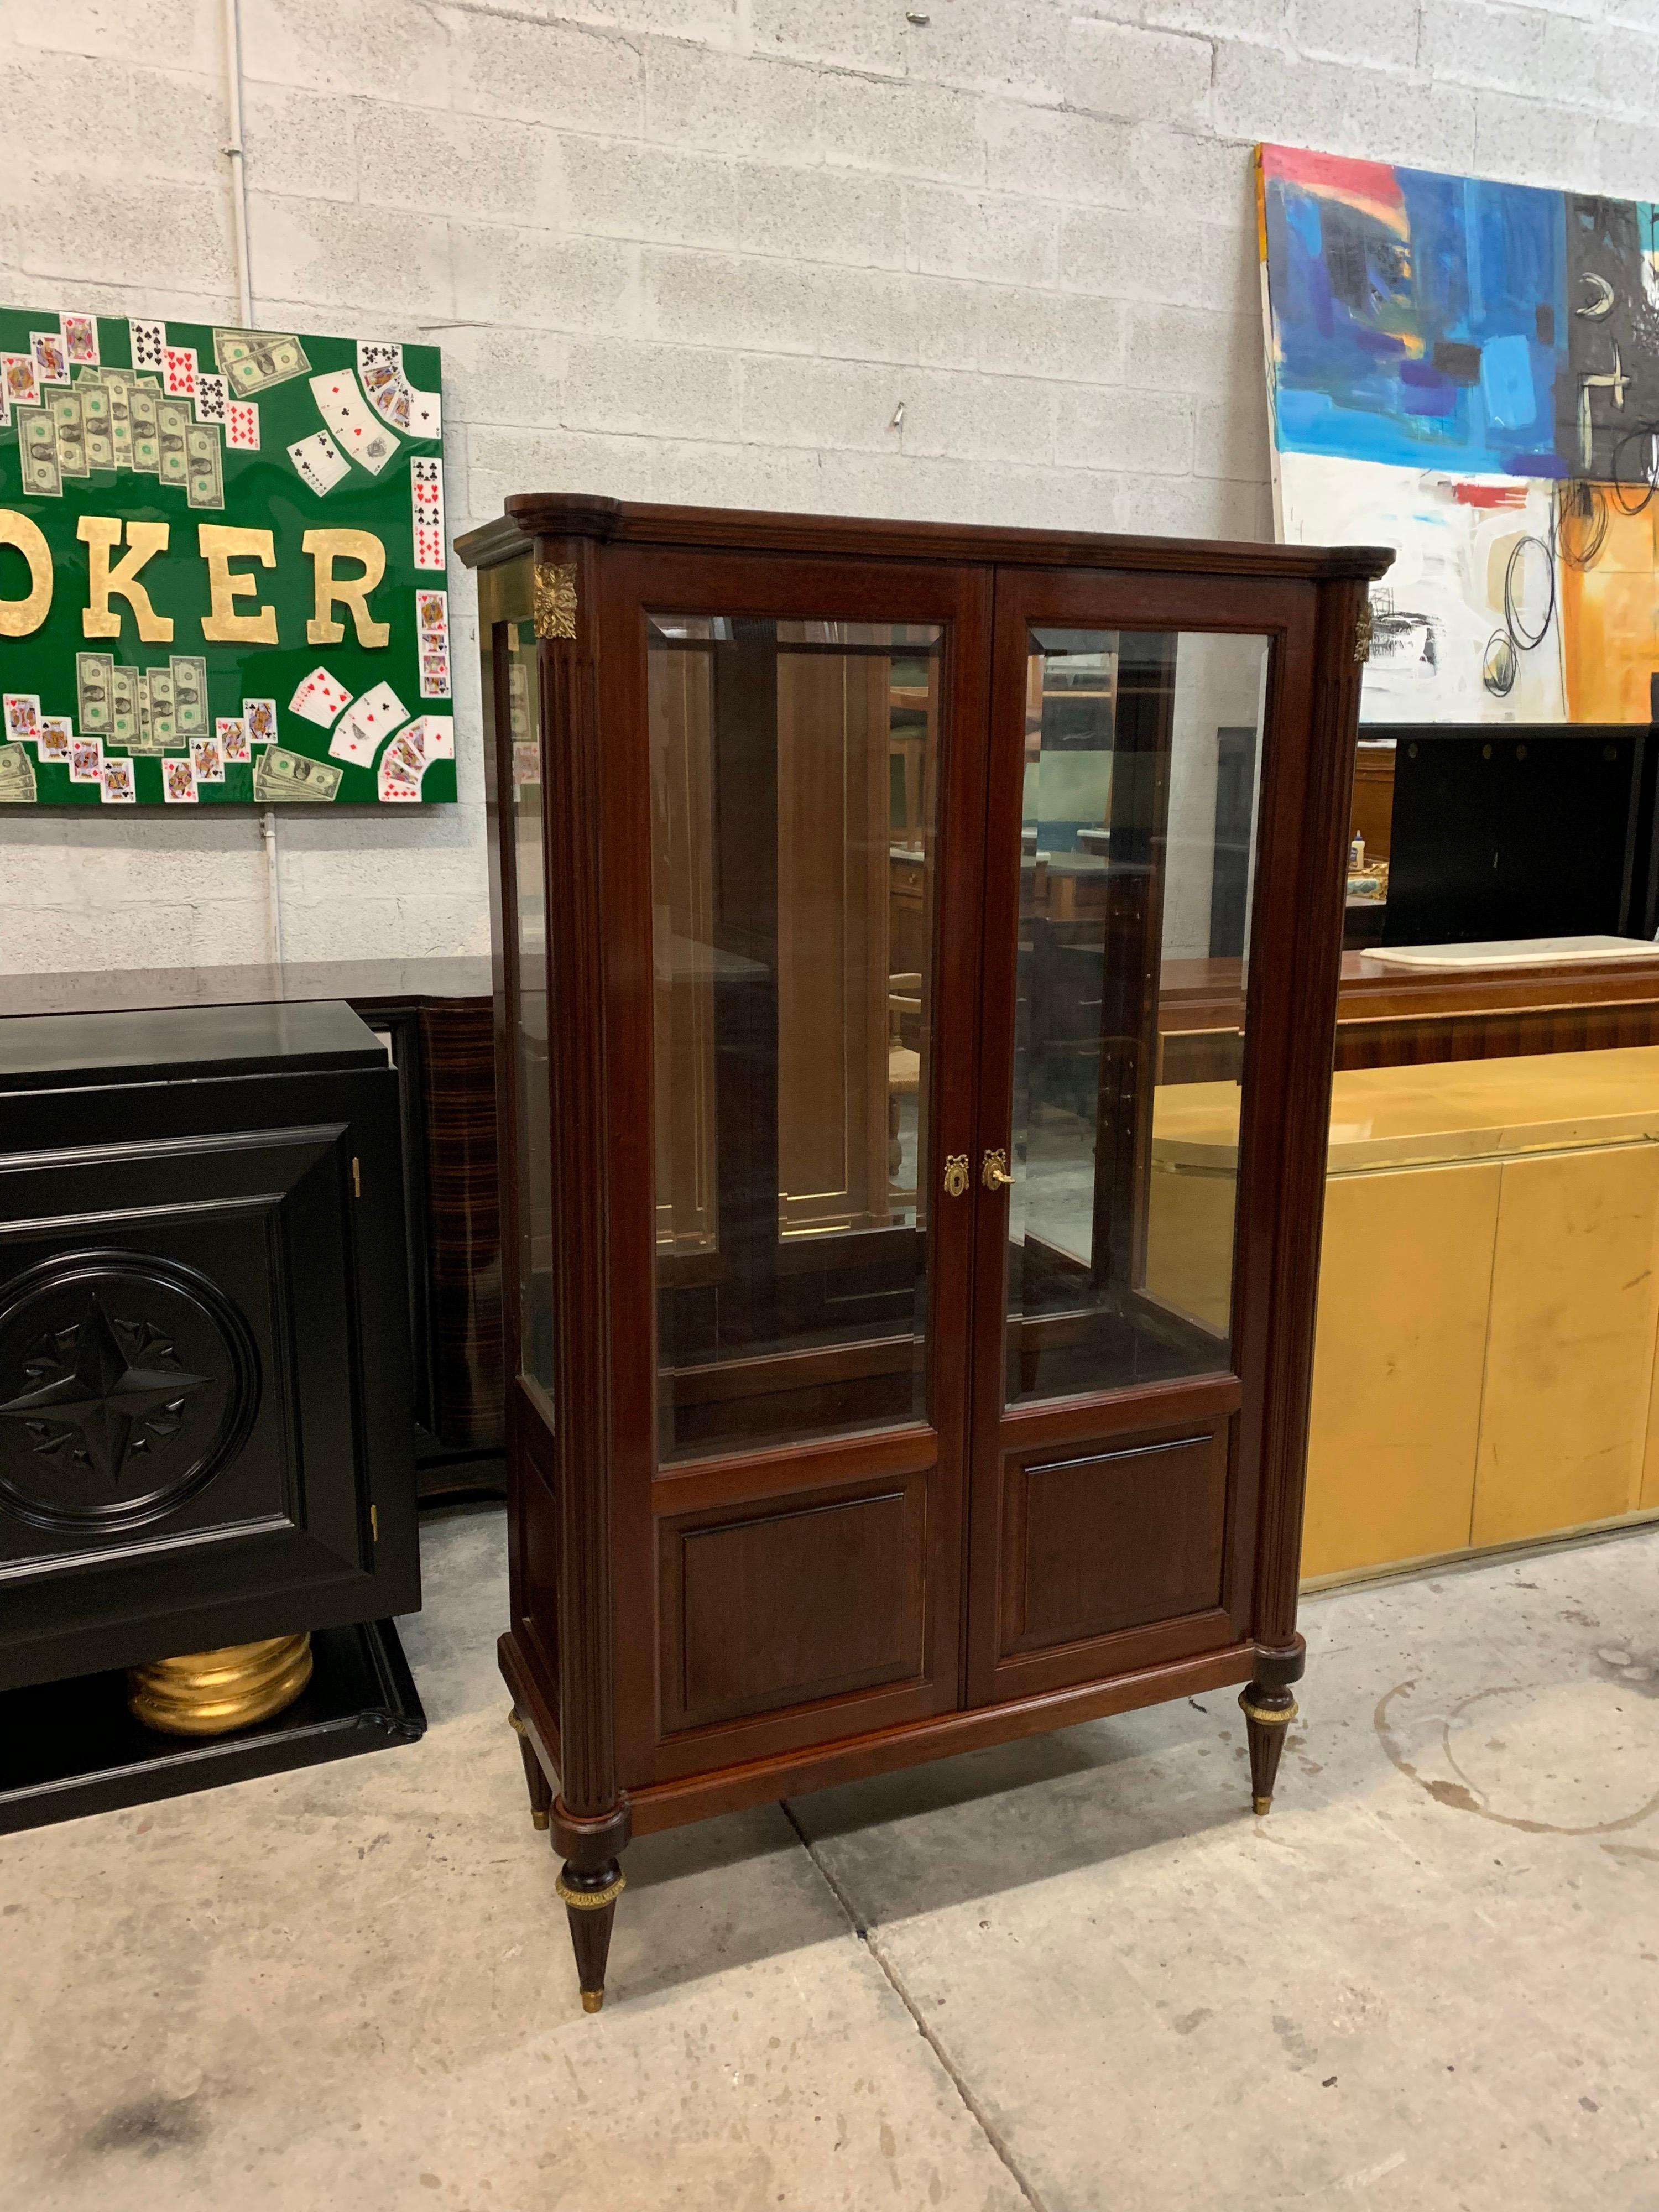 French antique Louis XVI style bookcase / vitrine 1910s made of mahogany, the mahogany wood has been finished with a French polished high luster inside and outside, It has two-door with beveled glass and a working lock and key. The mirrored interior